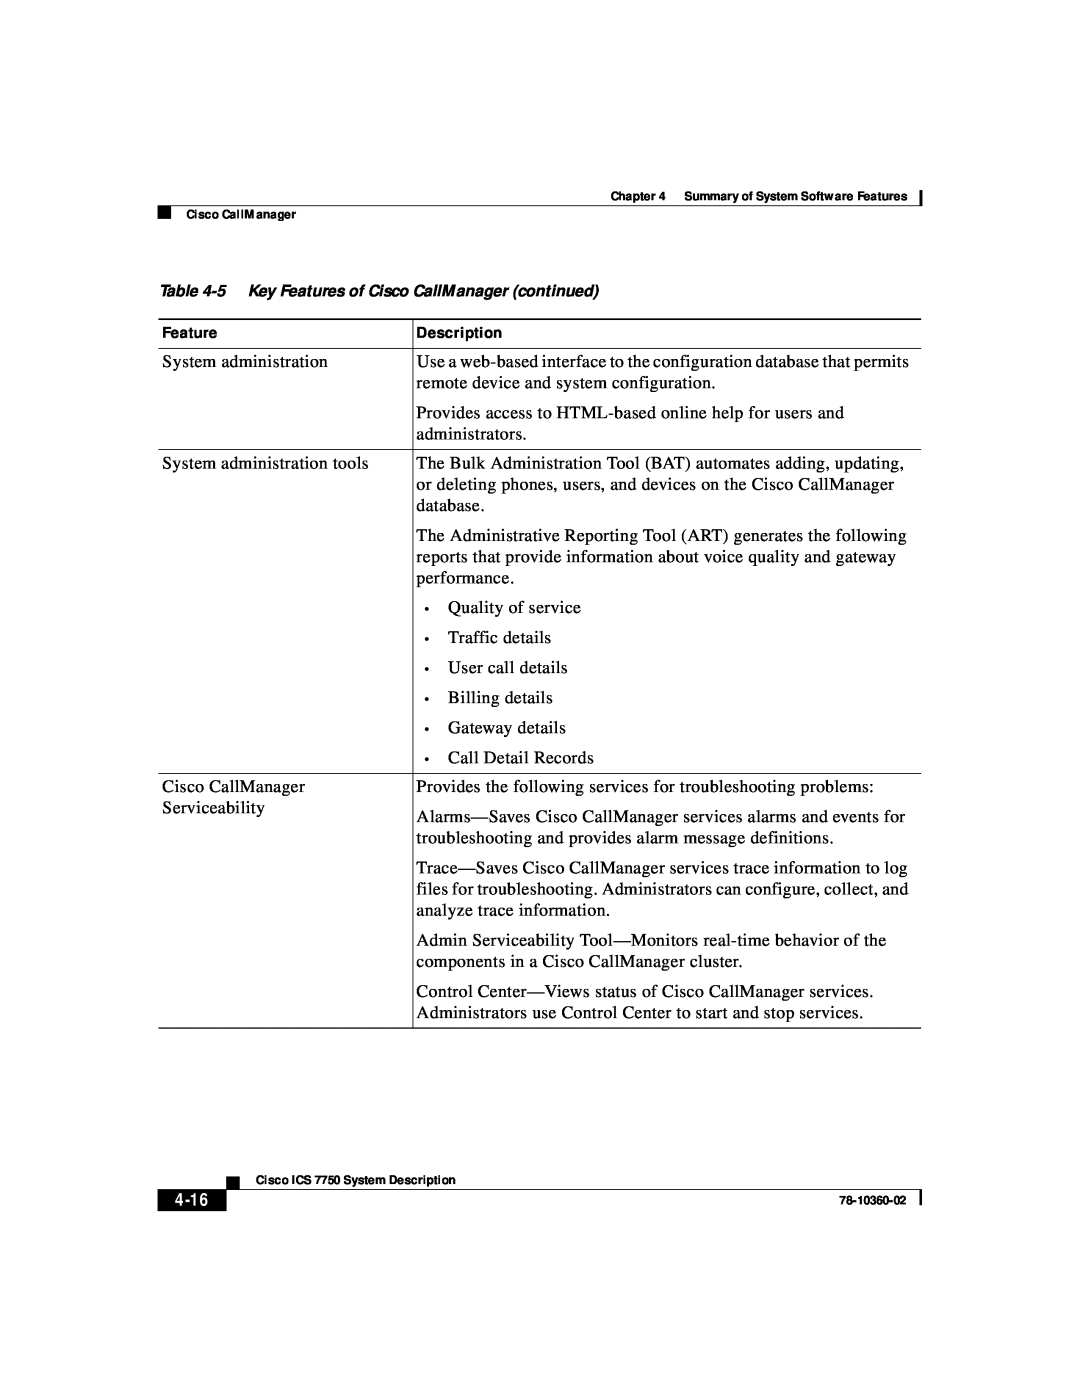 Cisco Systems ICS-7750 manual System administration, 4-16 